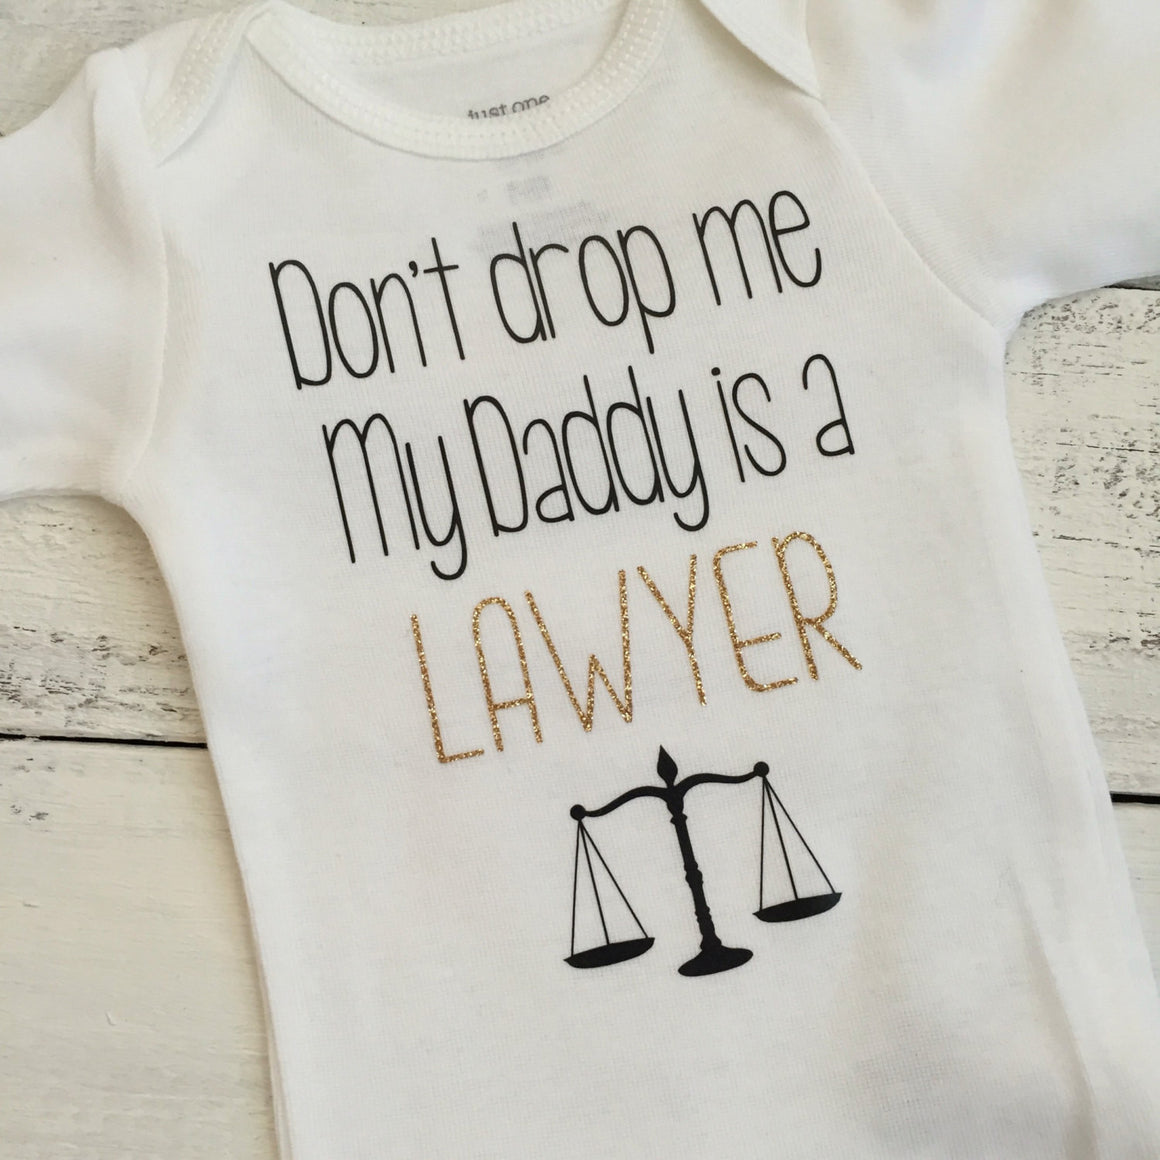 Don't drop me My Daddy is a LAWYER - gold glitter and black - HoneyLoveBoutique